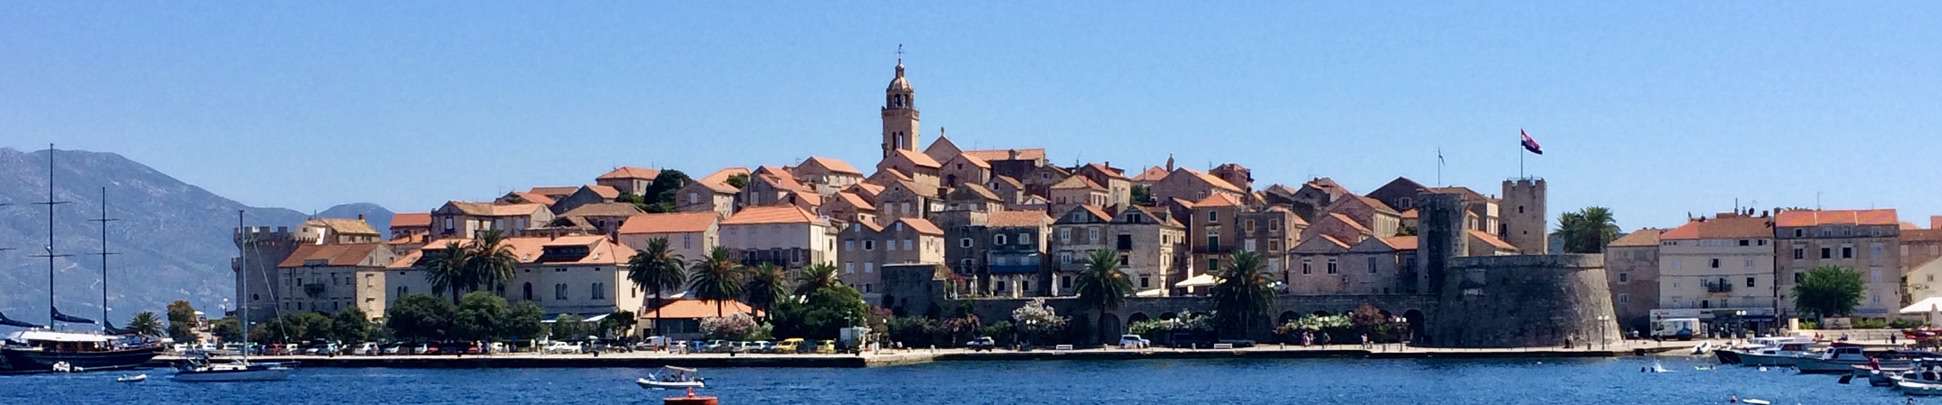 Korcula day-trip from Dubrovnik